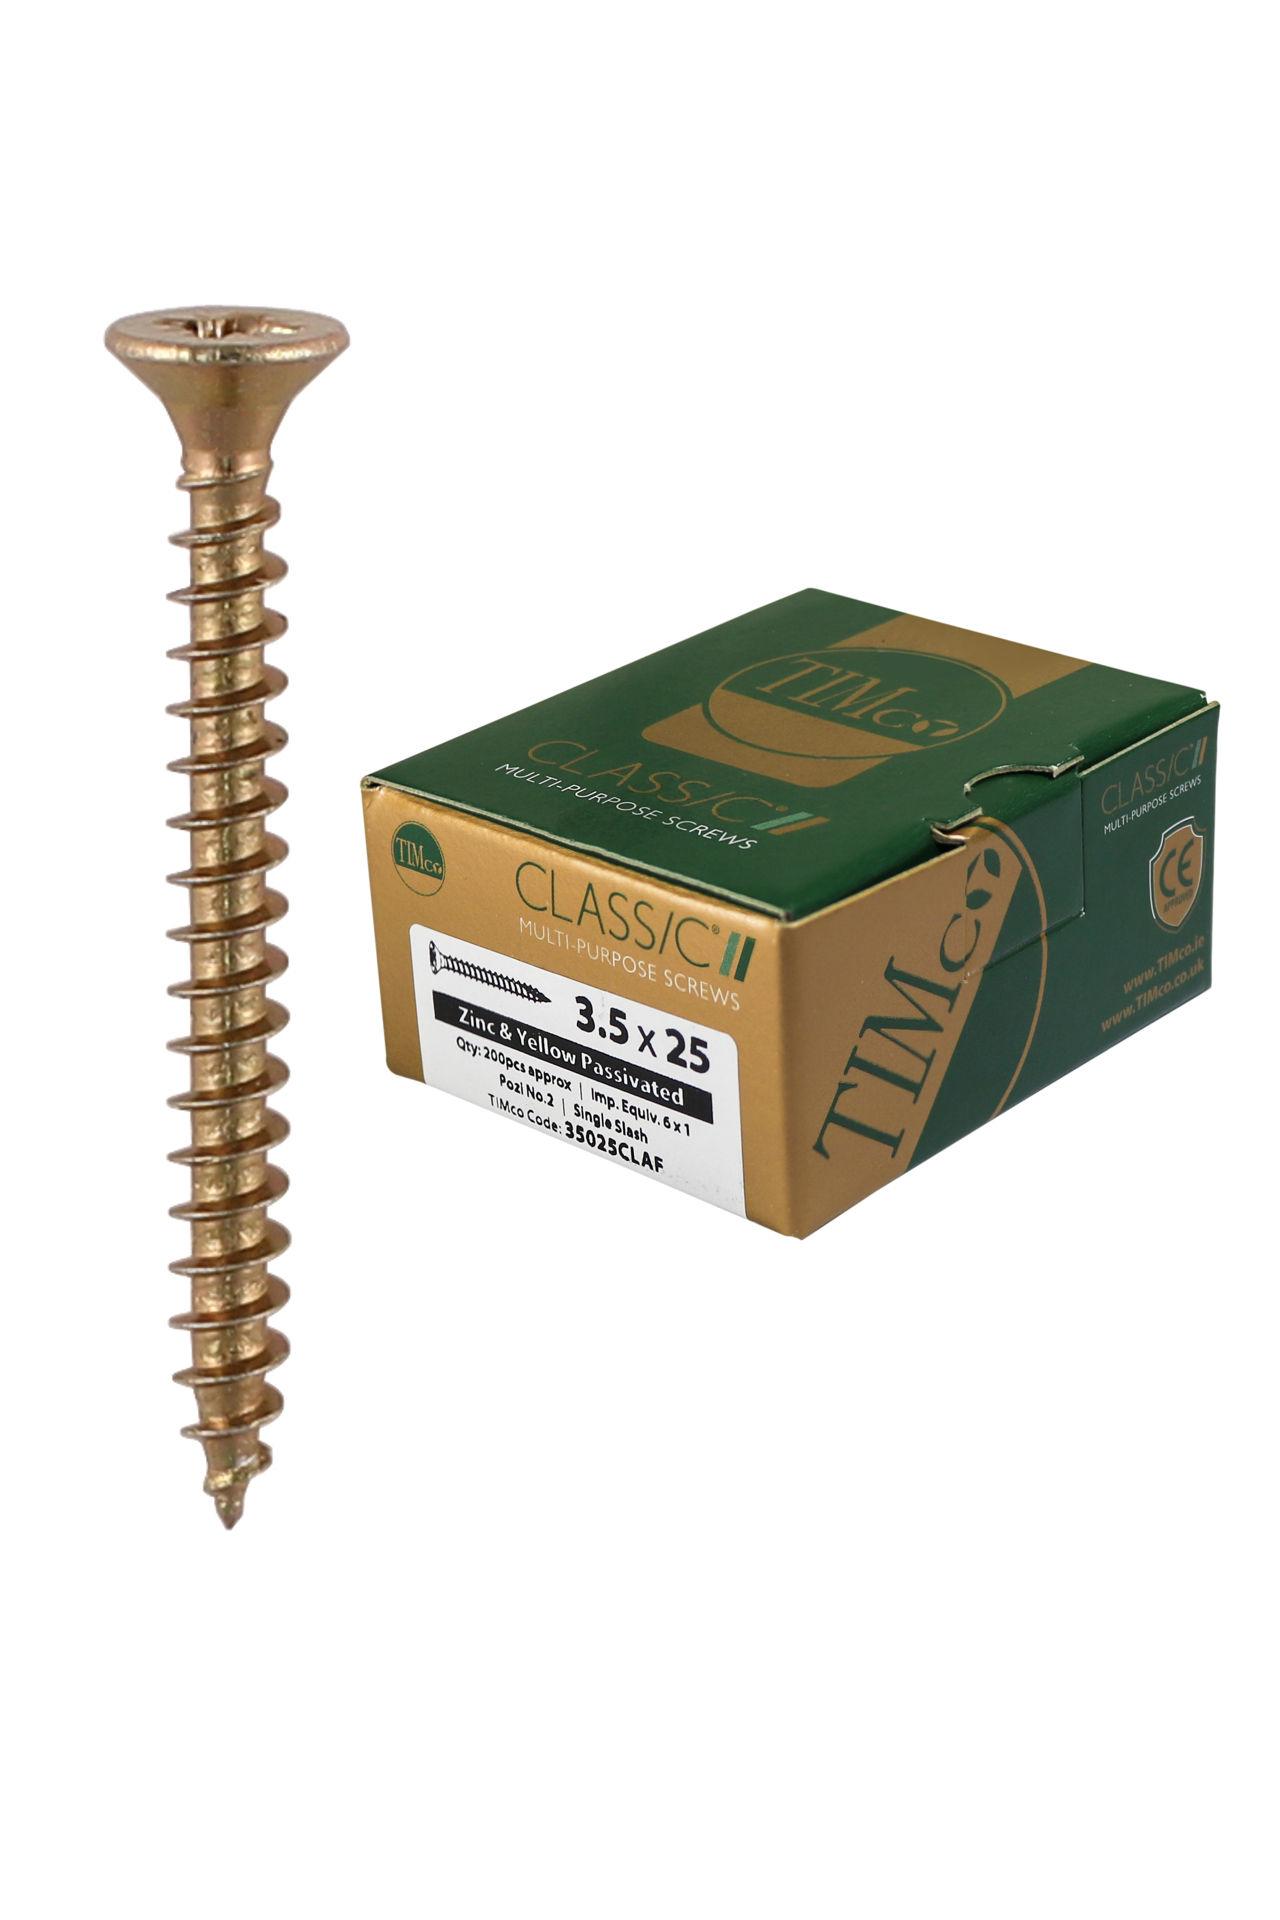 Classic Multi-Purpose Screws for Fixing Wood, Metal, MDF, Chipboard, Softwood and Hardwood #3